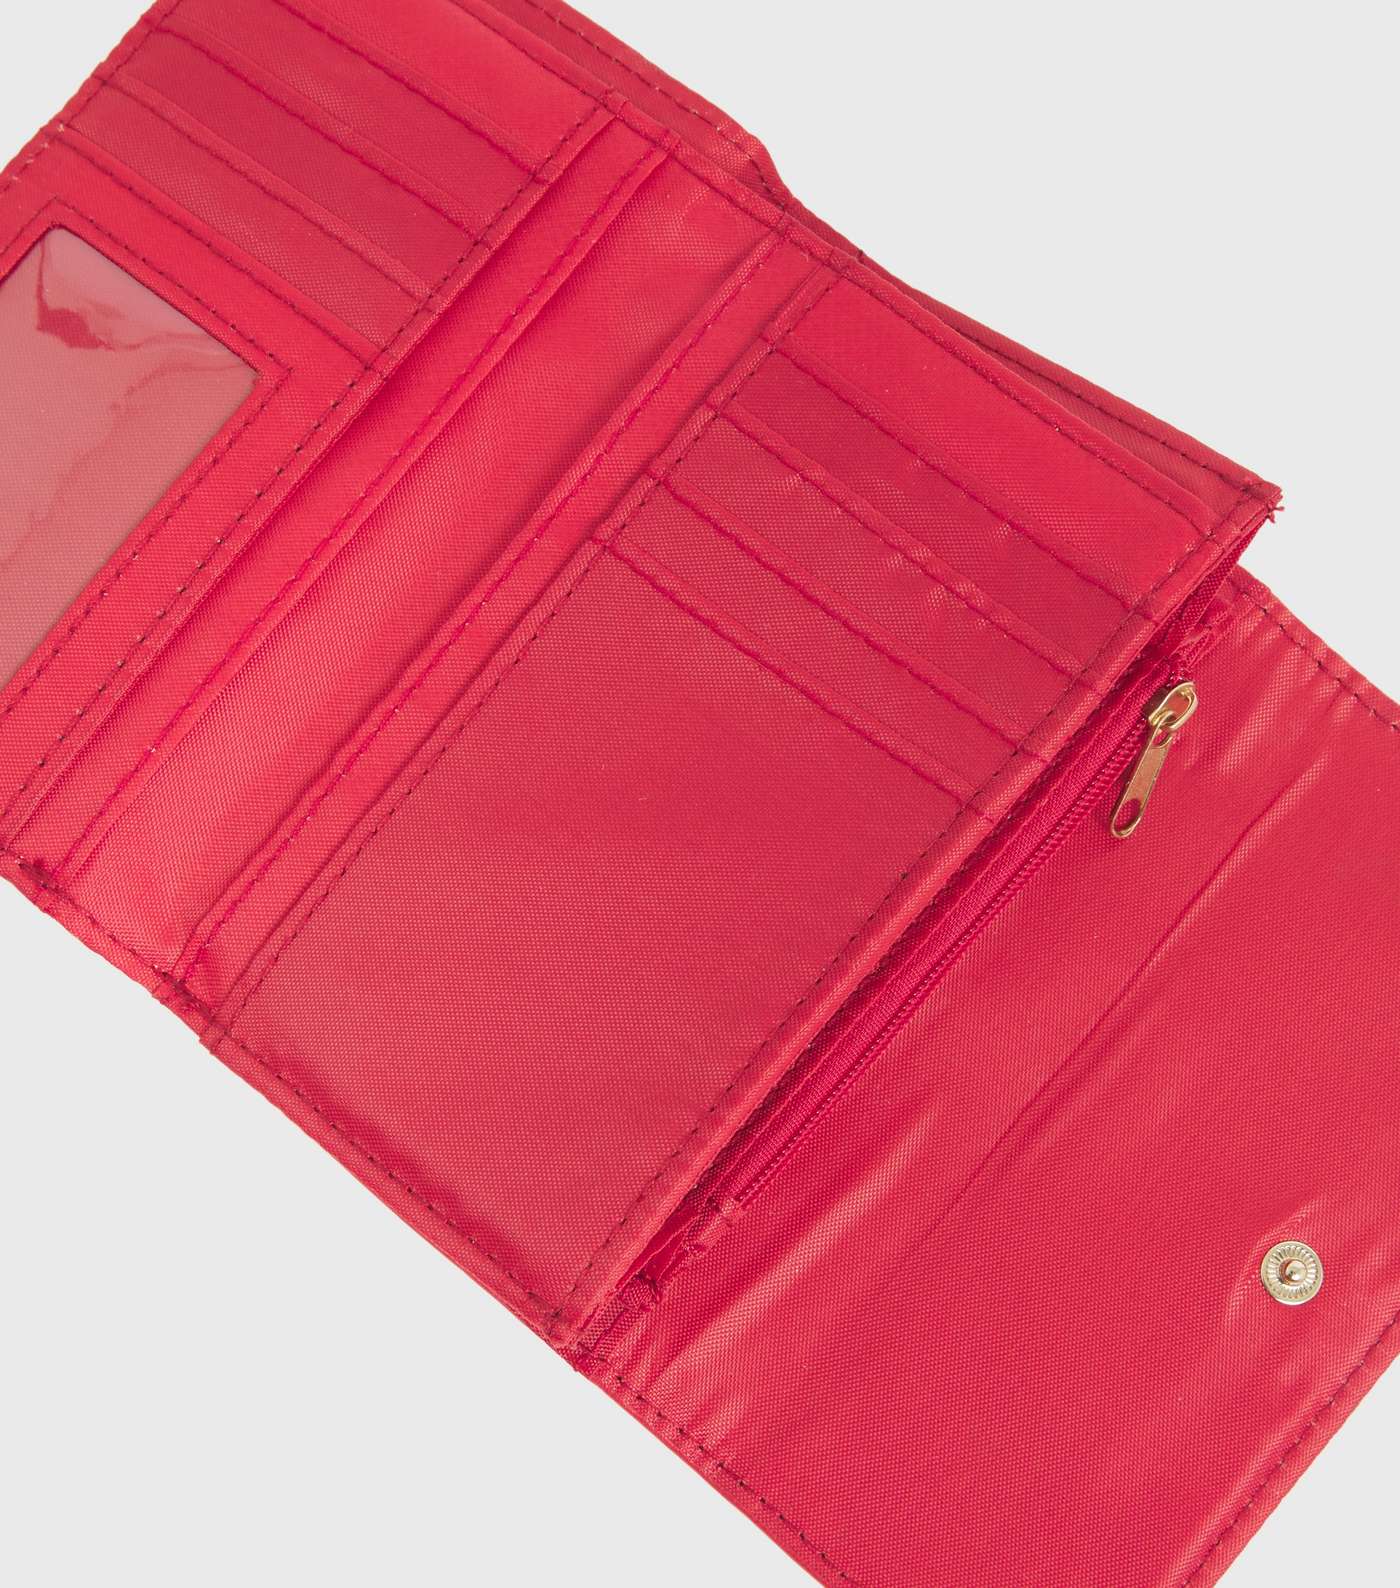 Red Leather-Look Chain Trim Purse Image 3